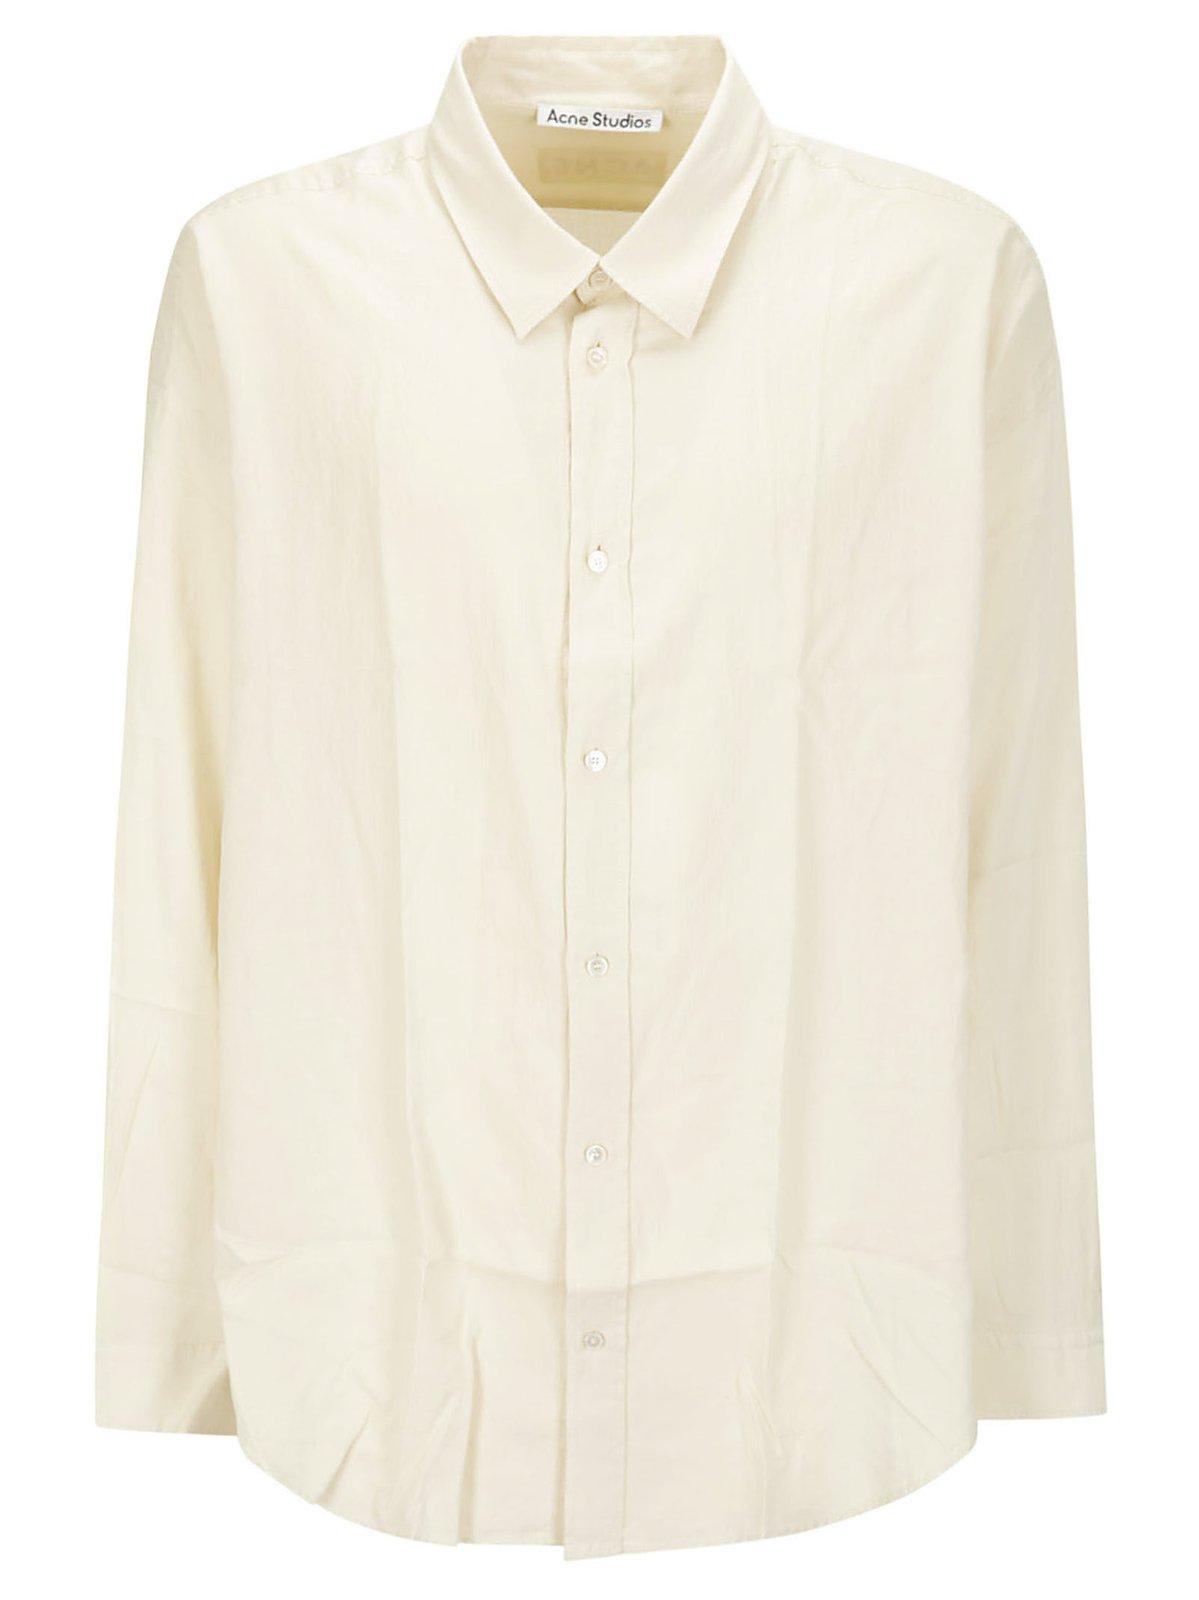 ACNE STUDIOS LONG SLEEVED BUTTON-UP SHIRT